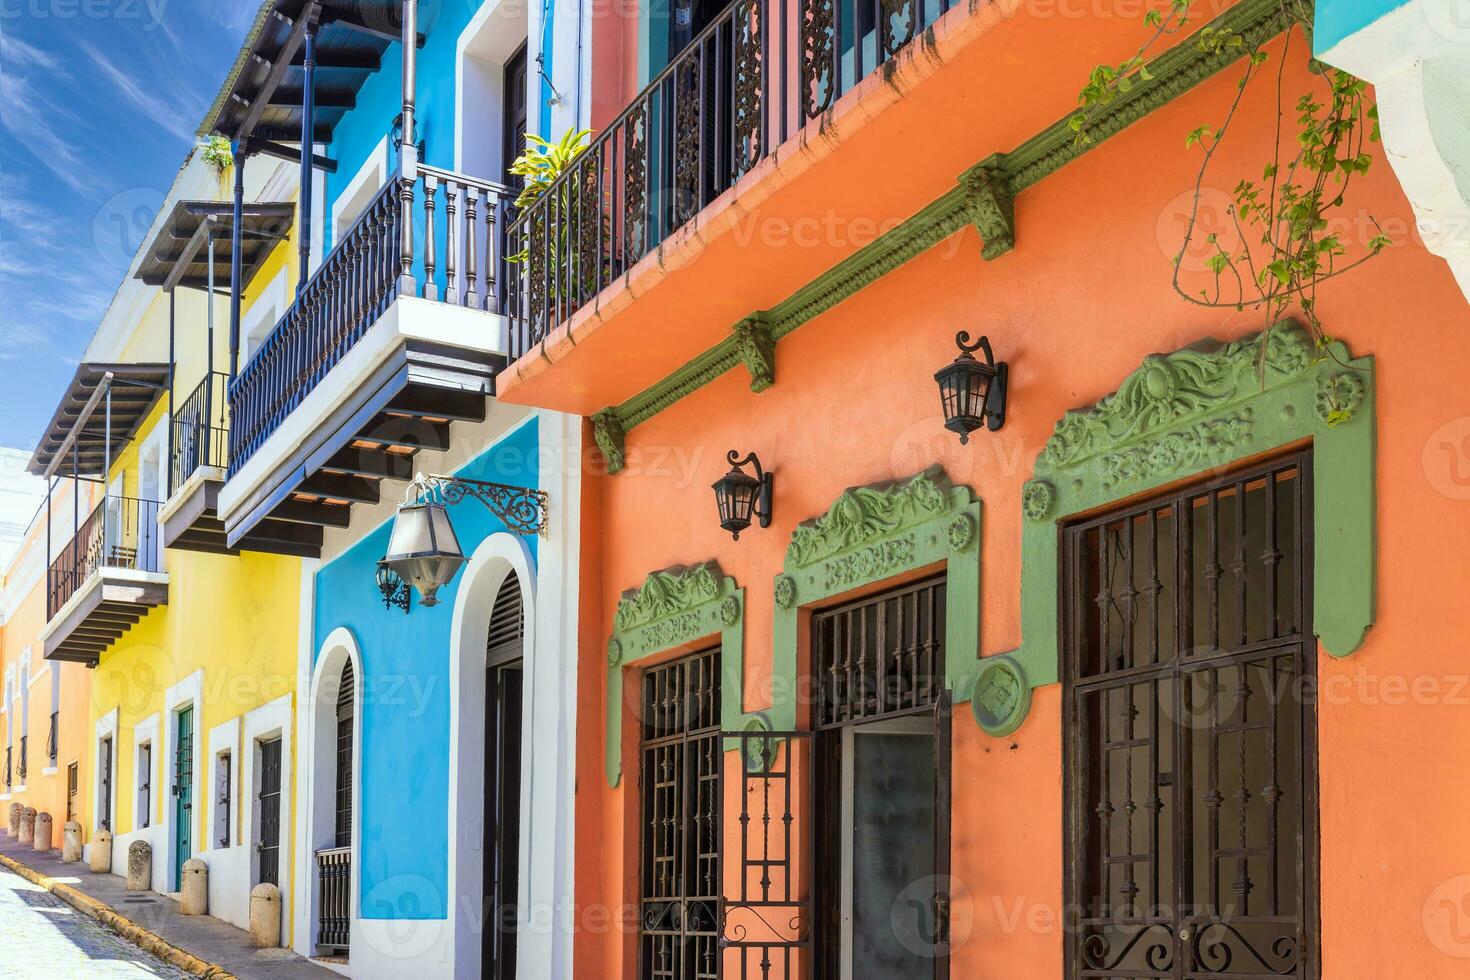 Puerto Rico colorful colonial architecture in historic city center photo